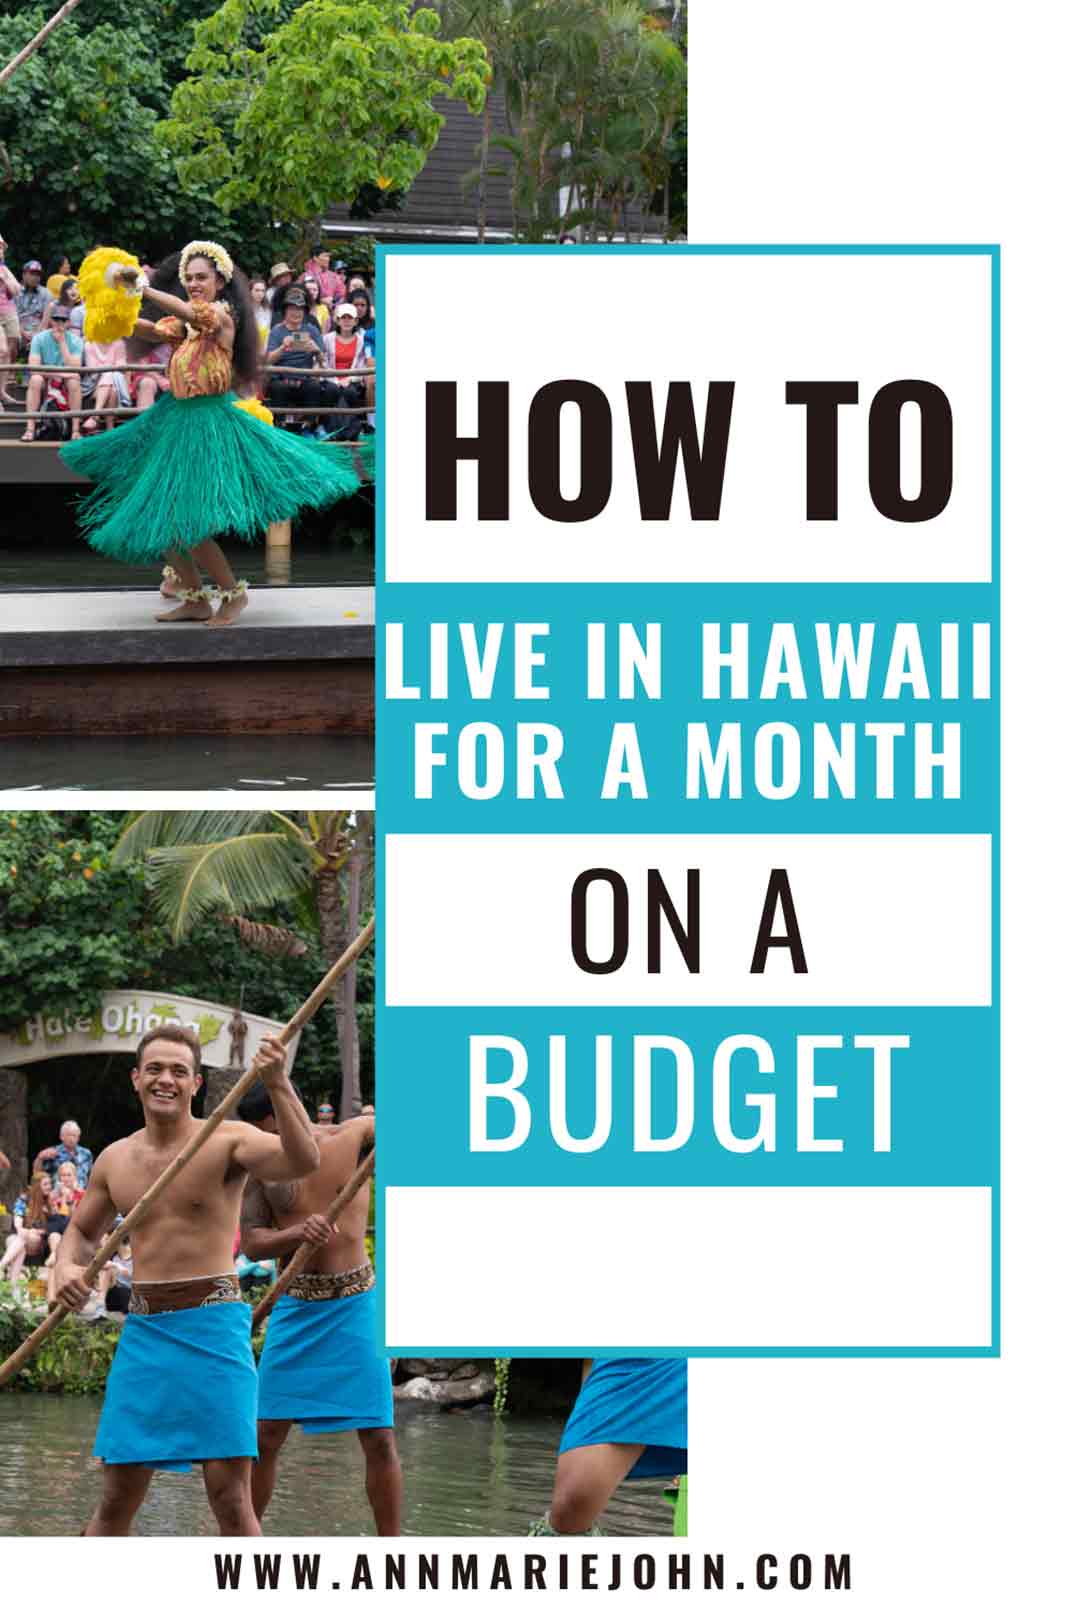 How to Live in Hawaii for a Month on a Budget